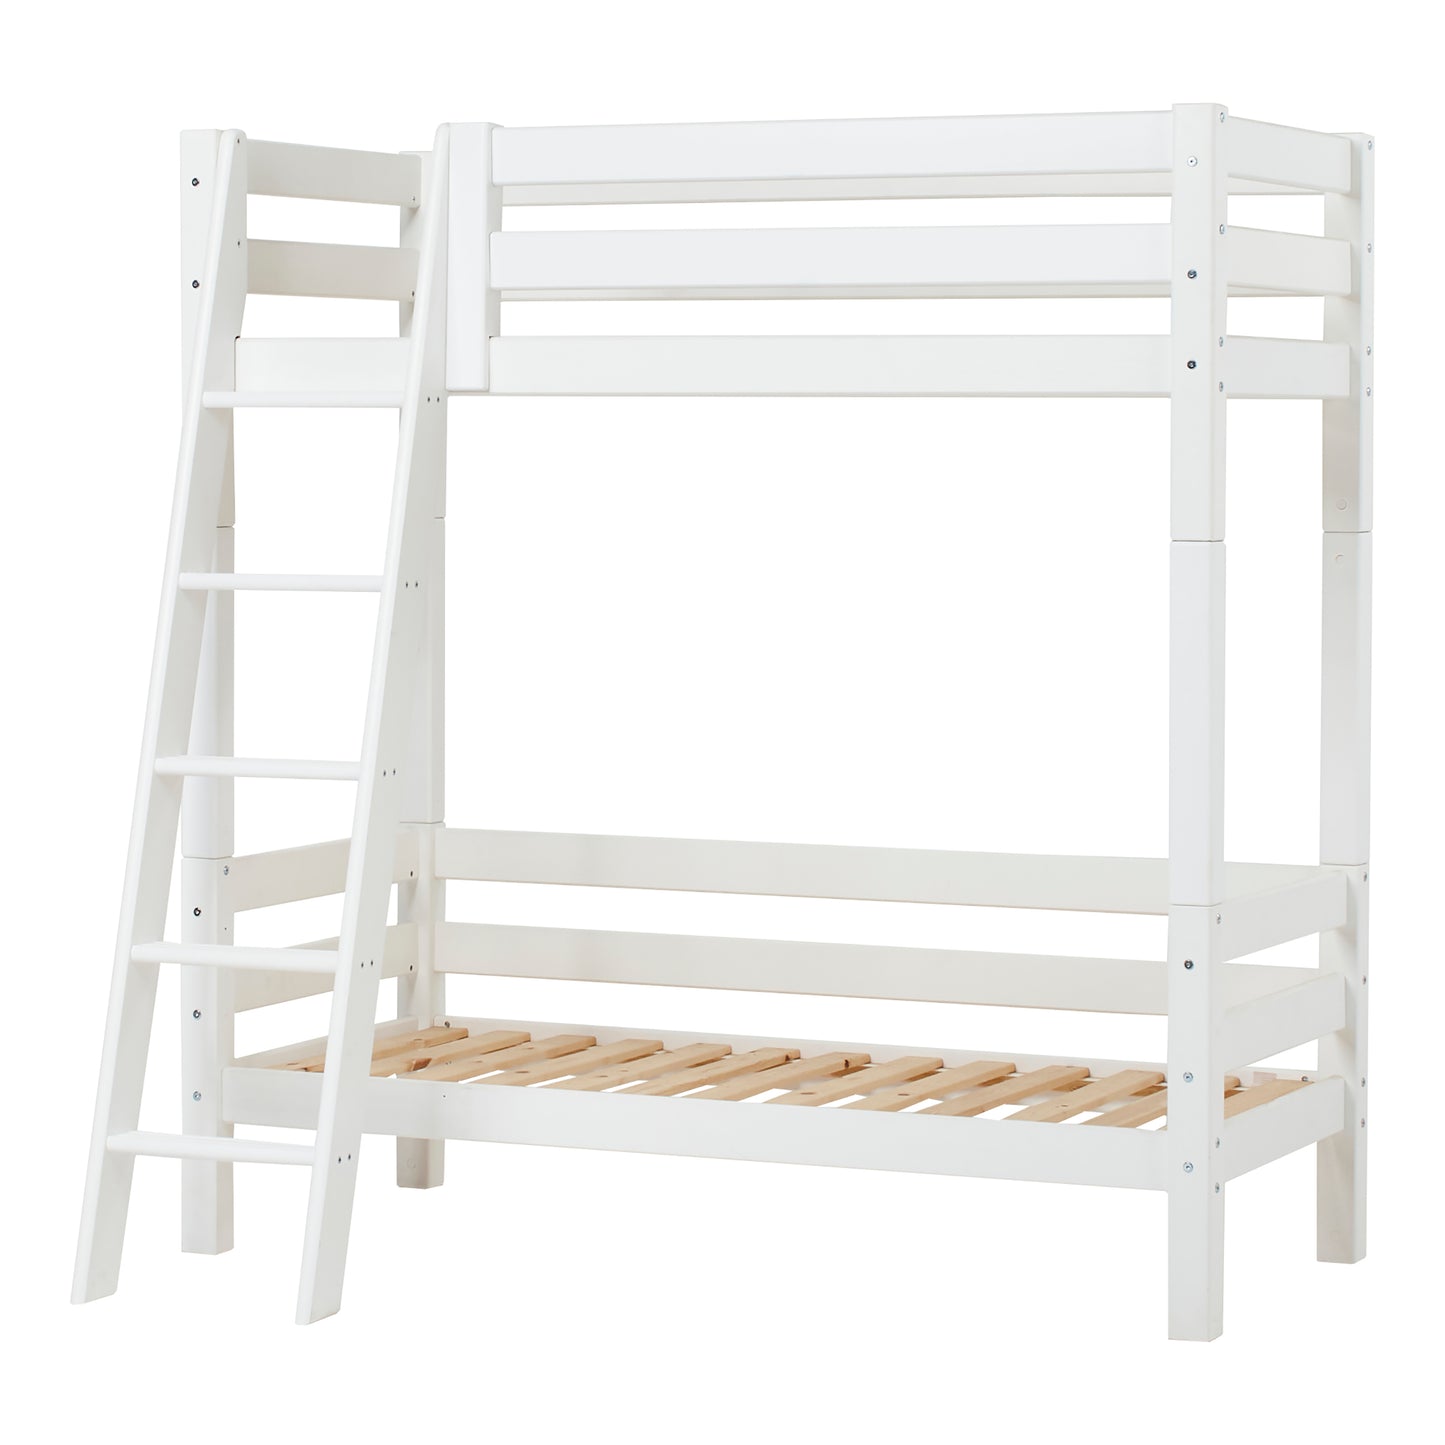 Hoppekids ECO Luxury High Bunk bed with backrail on lower Bed and Slanted Ladder